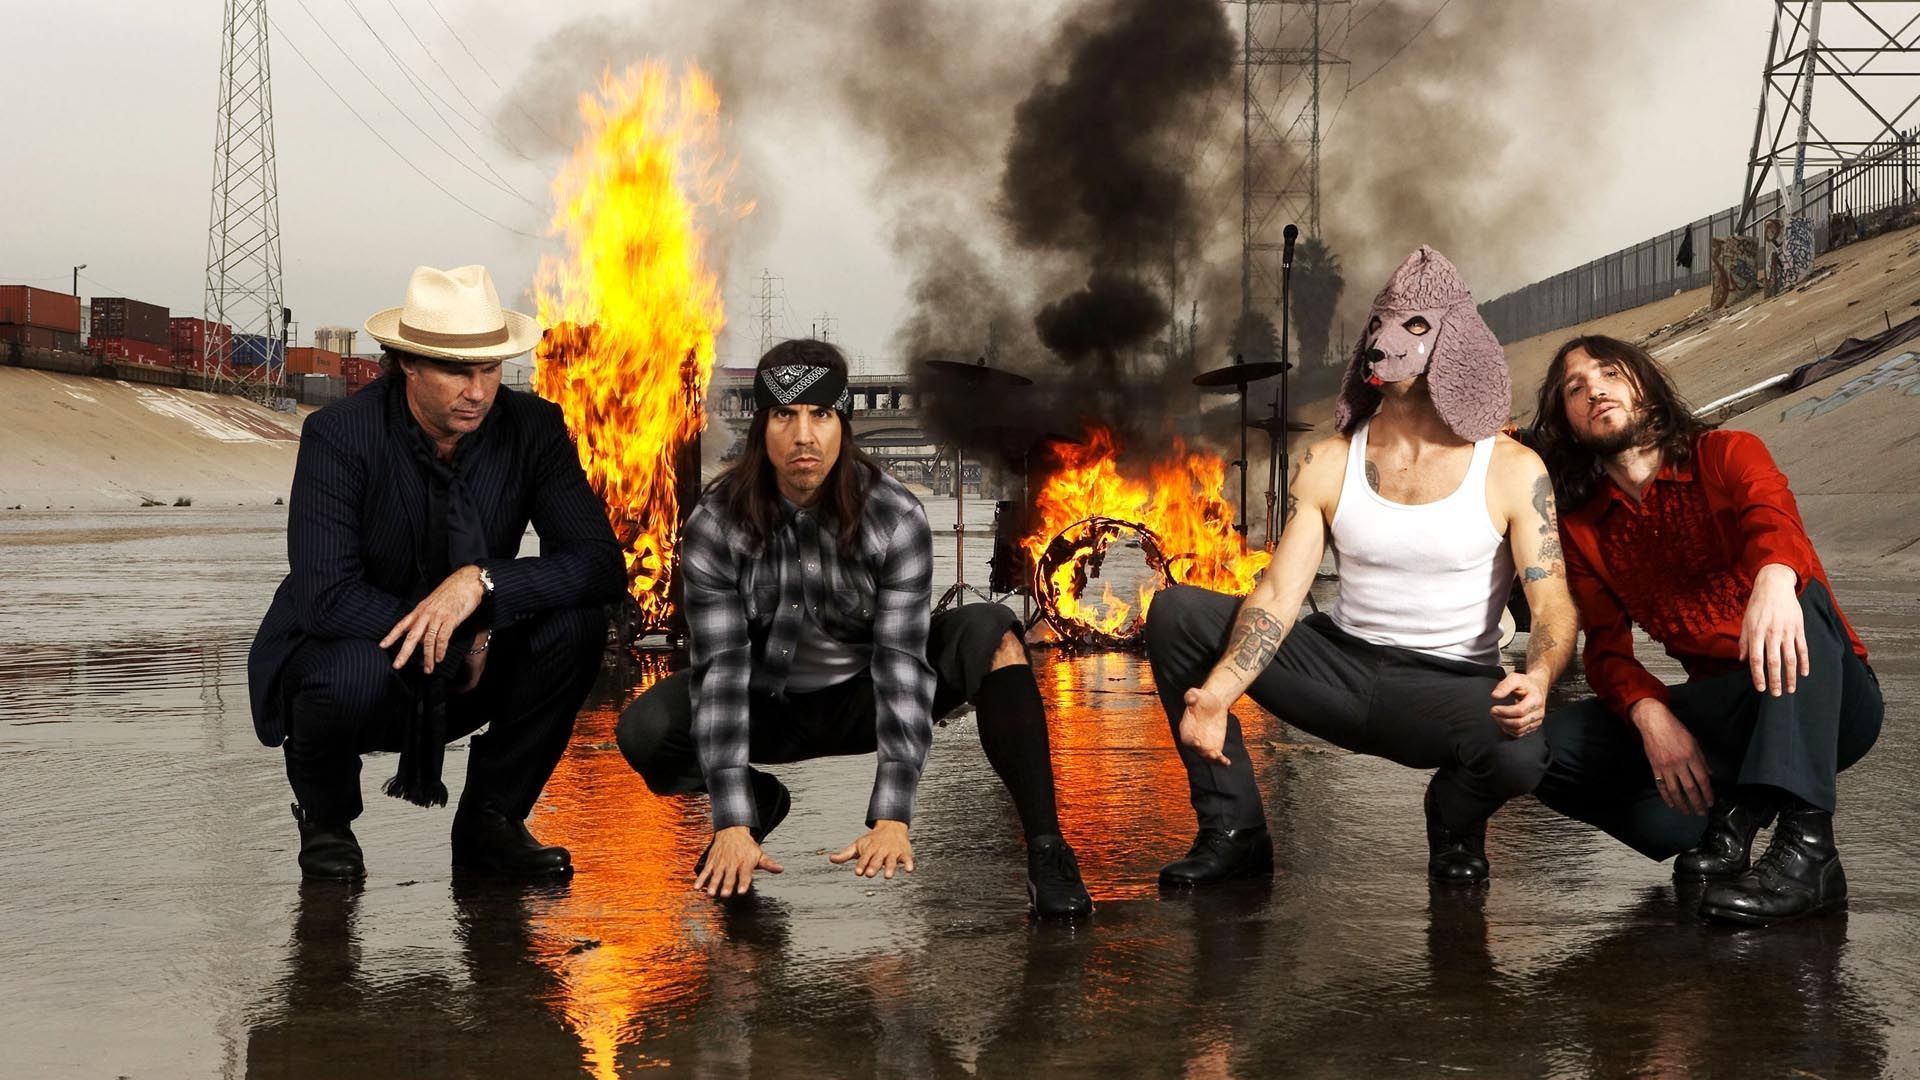 Download Wallpaper 1920x1080 Red hot chili peppers, Fire, Smoke ...